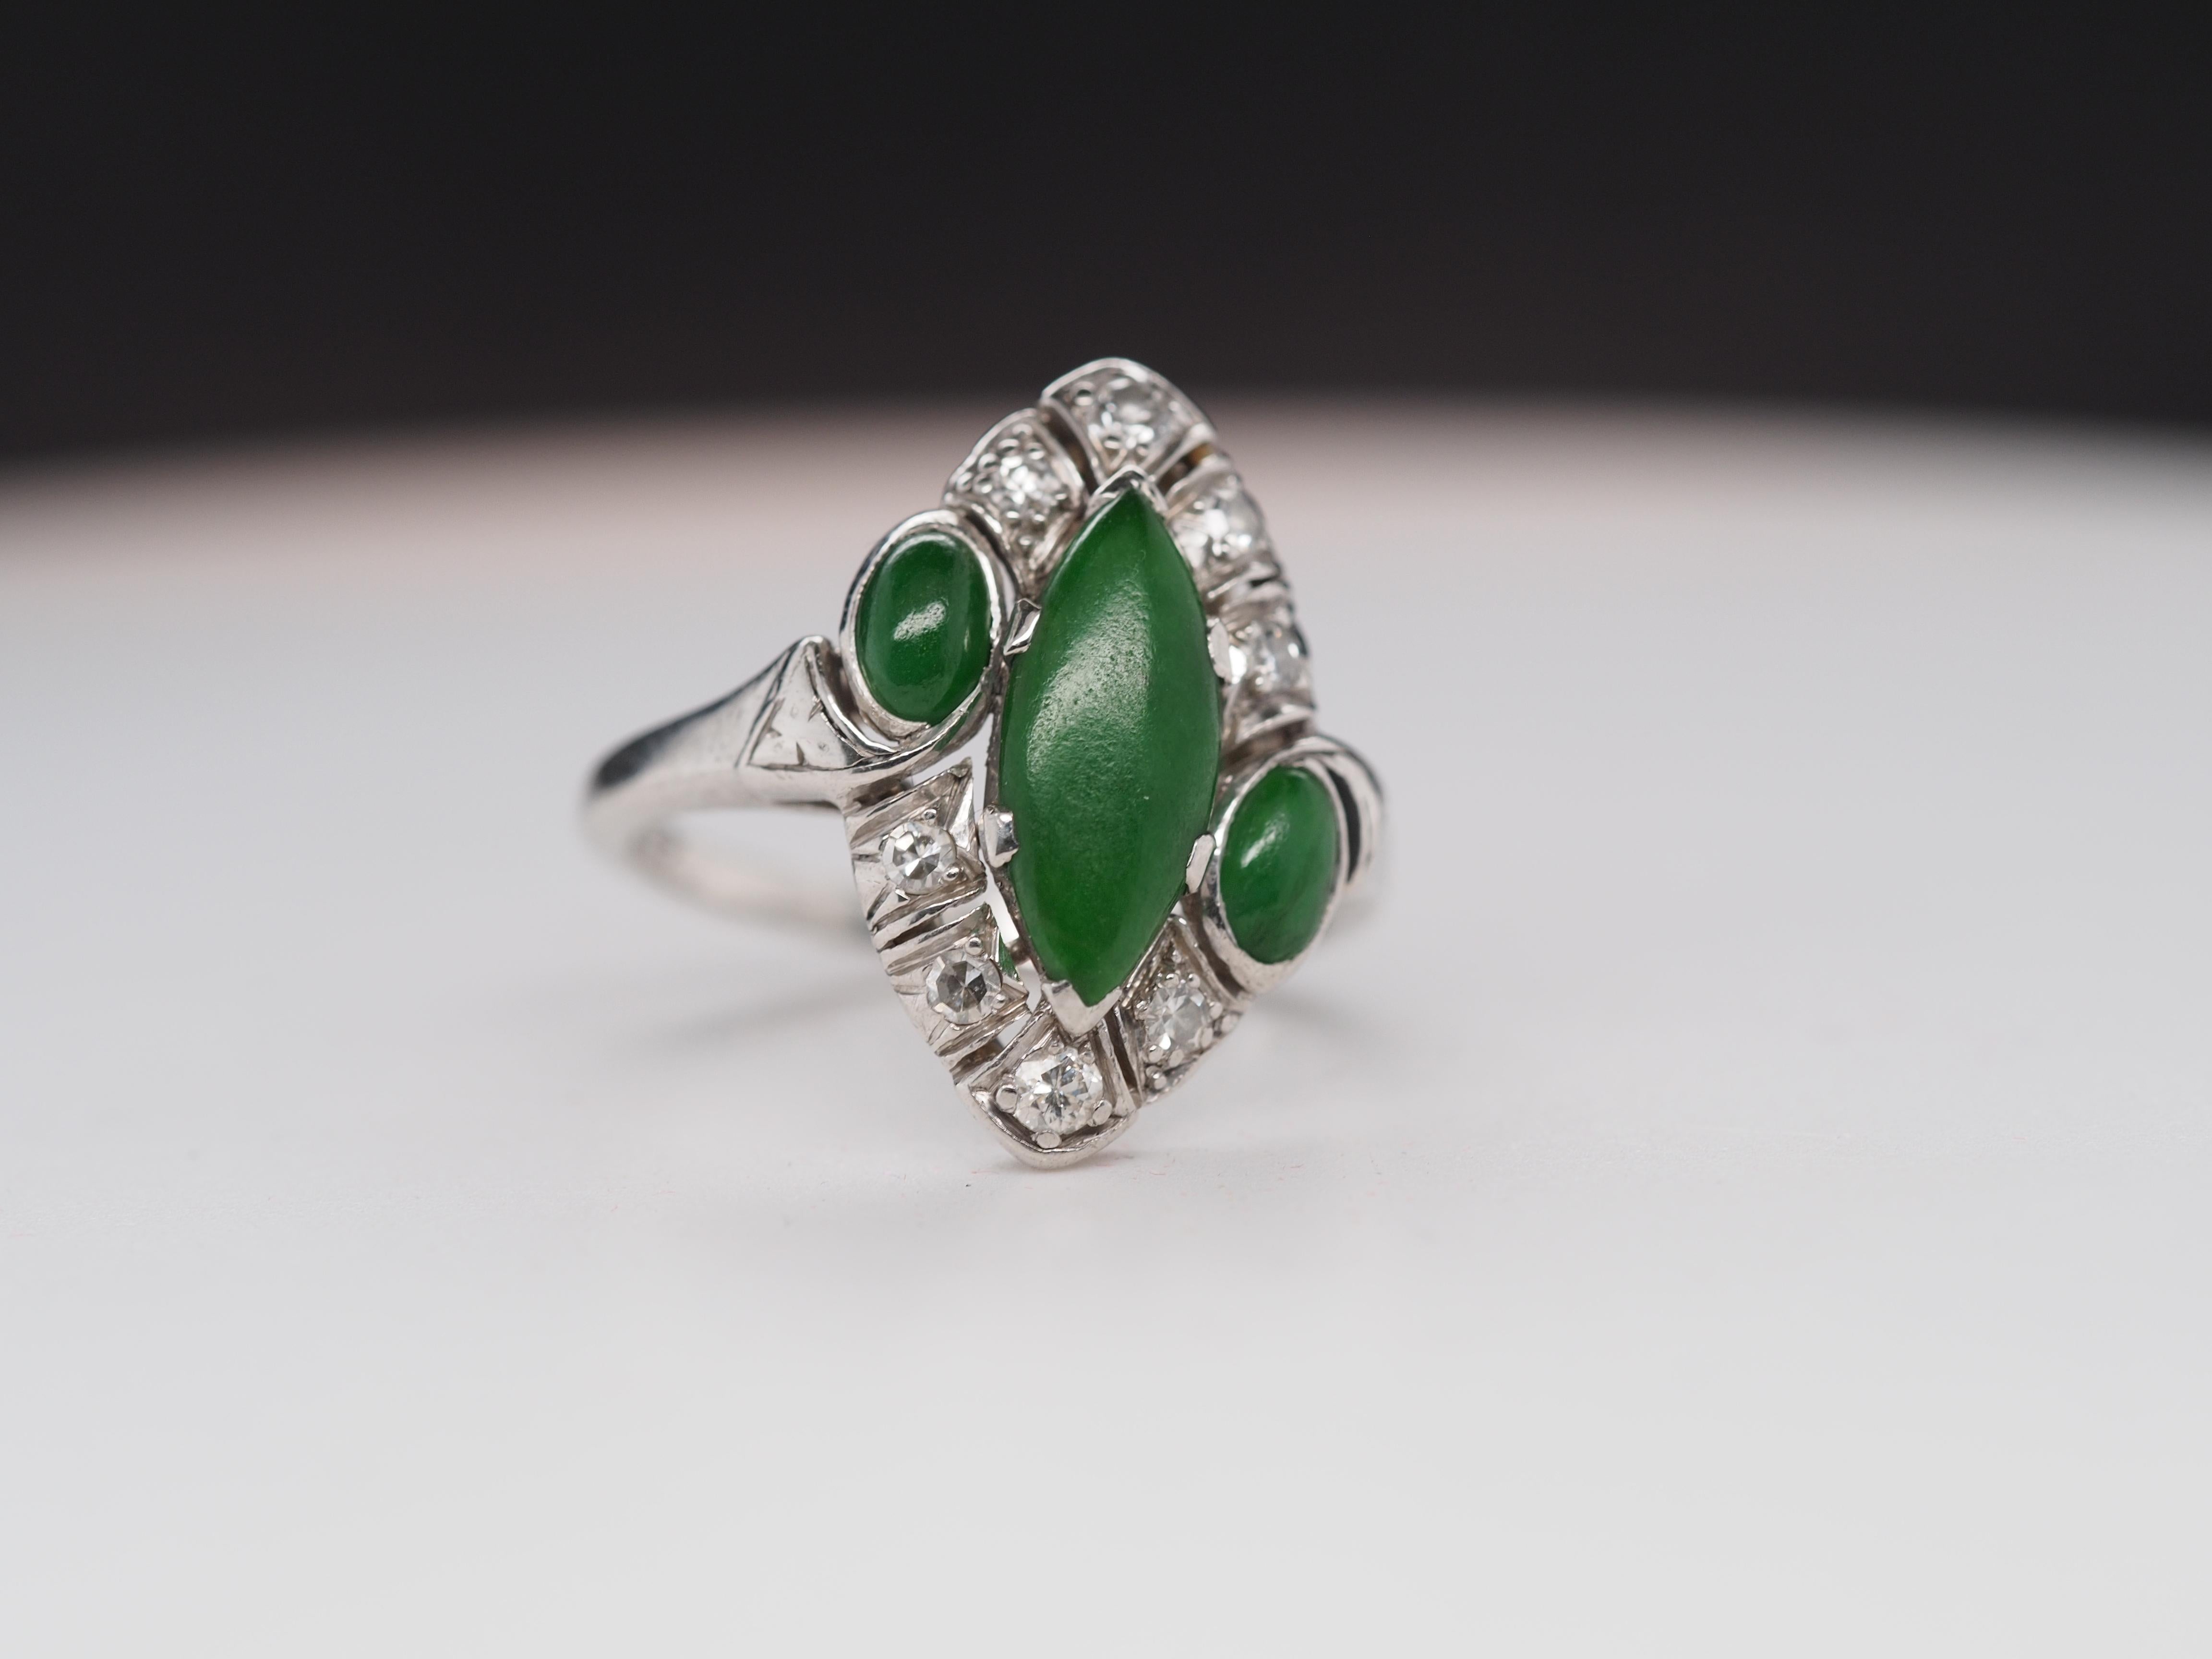 Item Details:
Ring Size: 5.5
Metal Type: Platinum [Hallmarked, and Tested]
Weight: 5.3 grams
Center Stone:
Jade, Natural, Green, Opaque, Untreated.
Diamonds: Natural, Old European Cut, F-G Color, VS Clarity.
Band Width: 1.75mm
Condition: Excellent